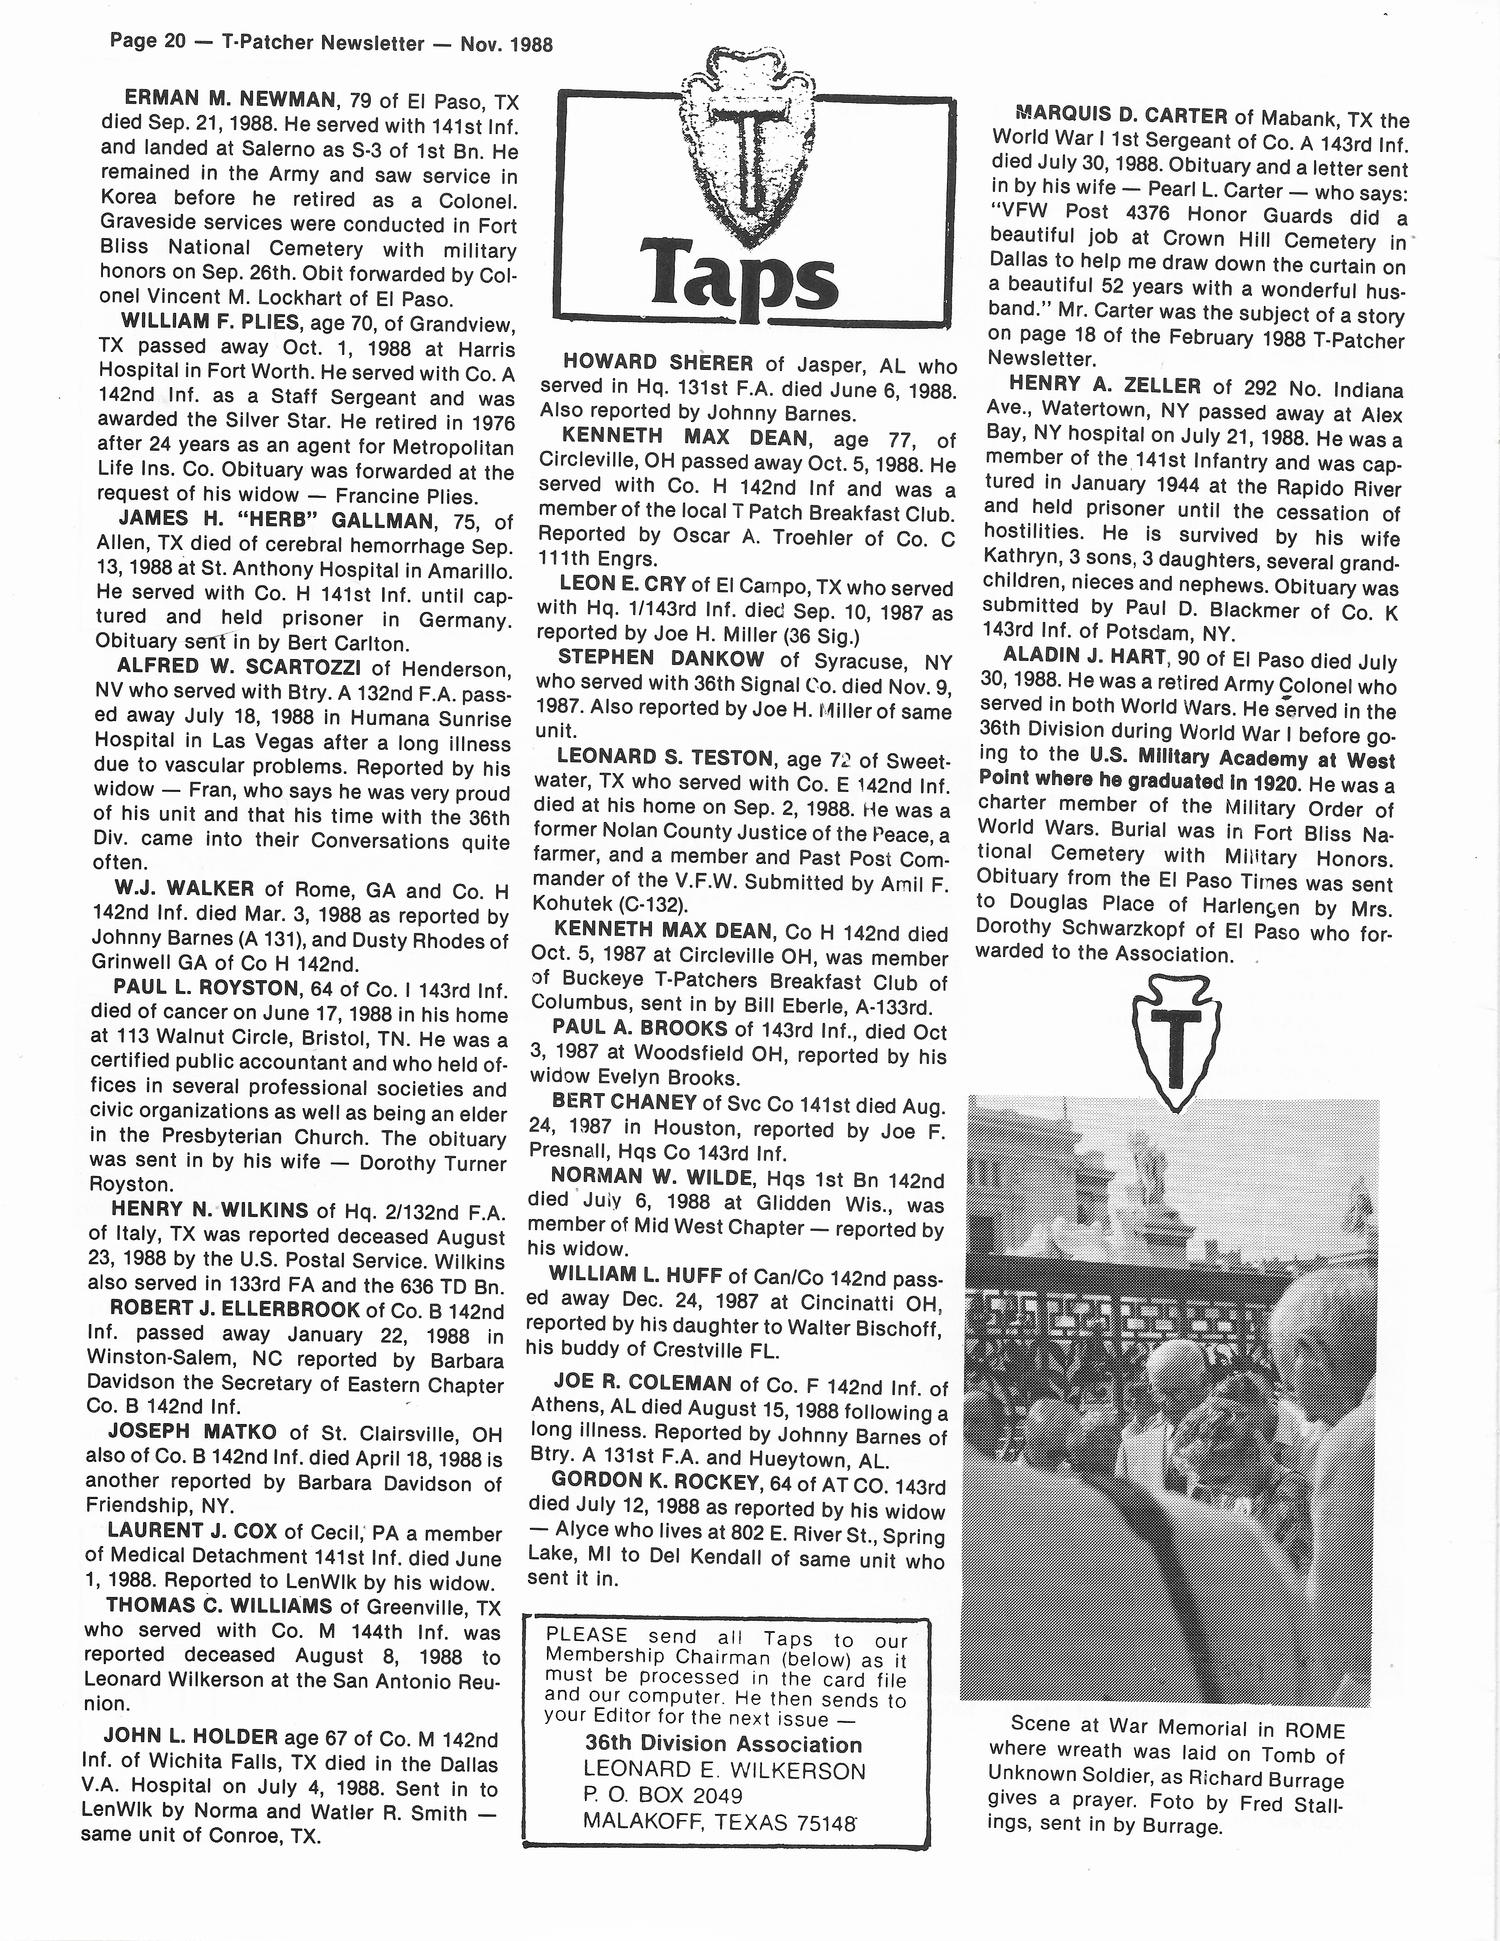 The T-Patcher, November 1988
                                                
                                                    20
                                                